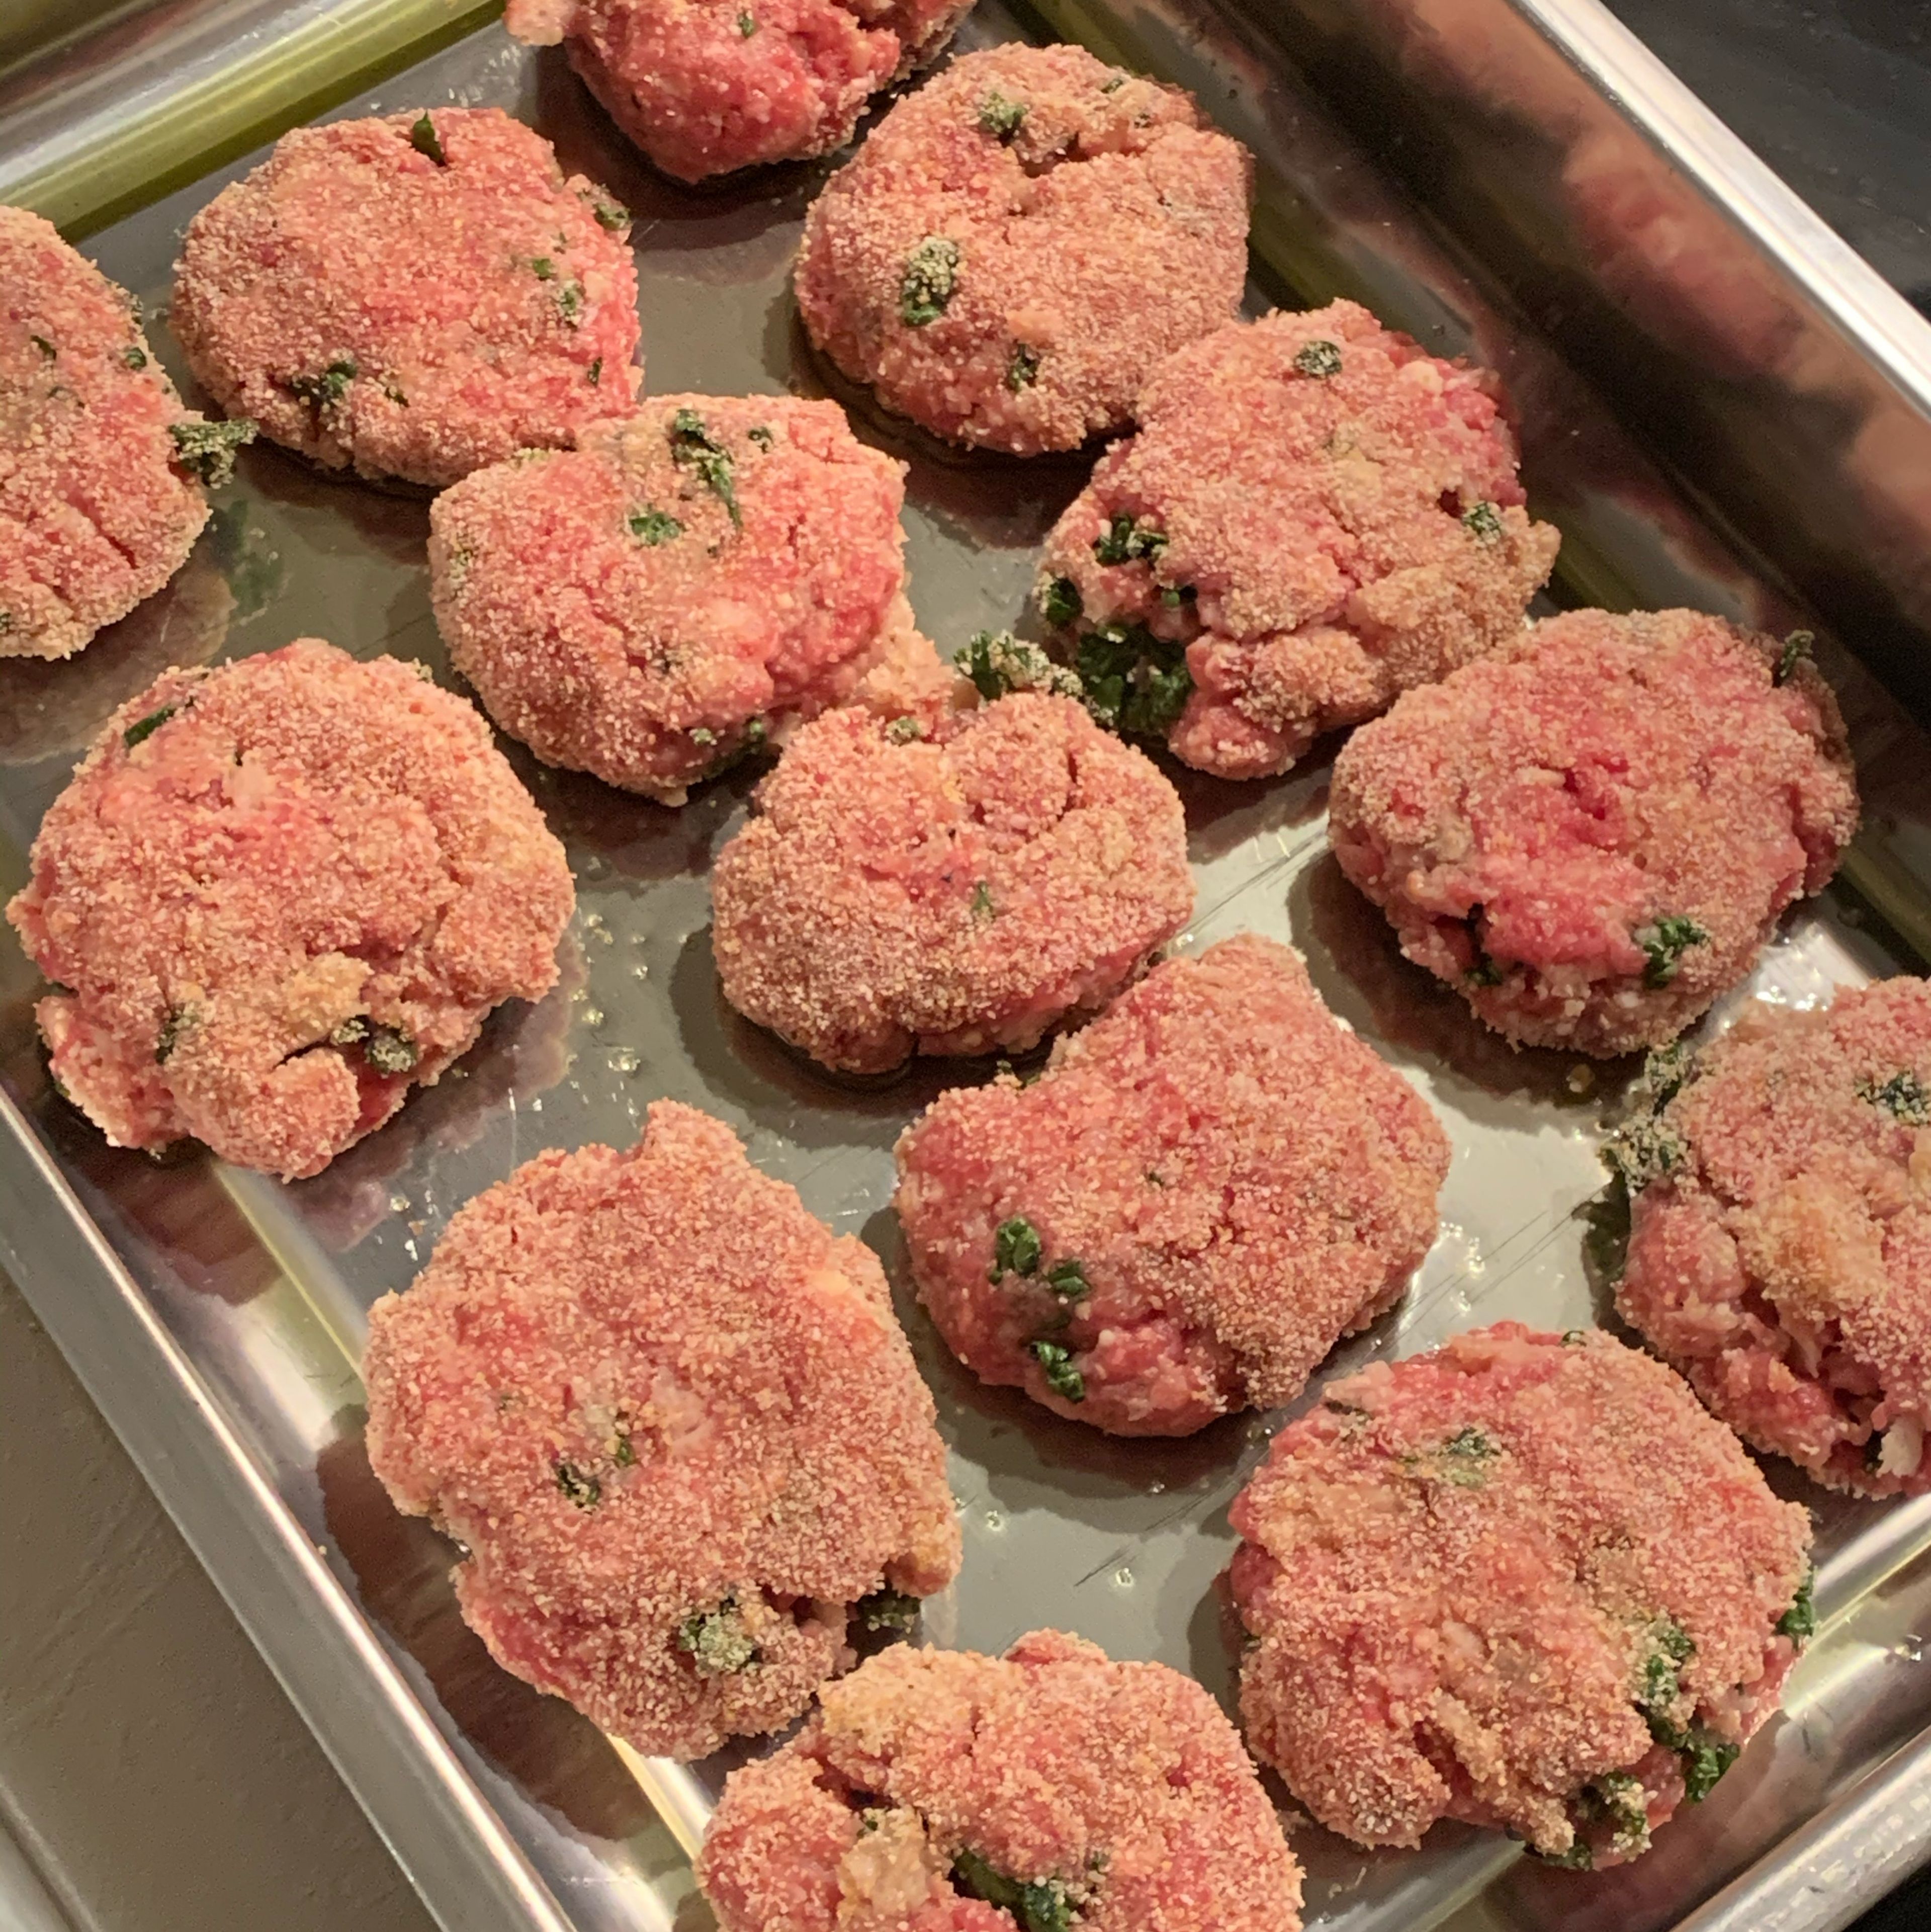 Place the meatballs on an oiled baking tin. Preheat the oven at 180 degrees and let the meatballs cook for about 30/40 minutes (cooking time will depend on the size of the meatballs).